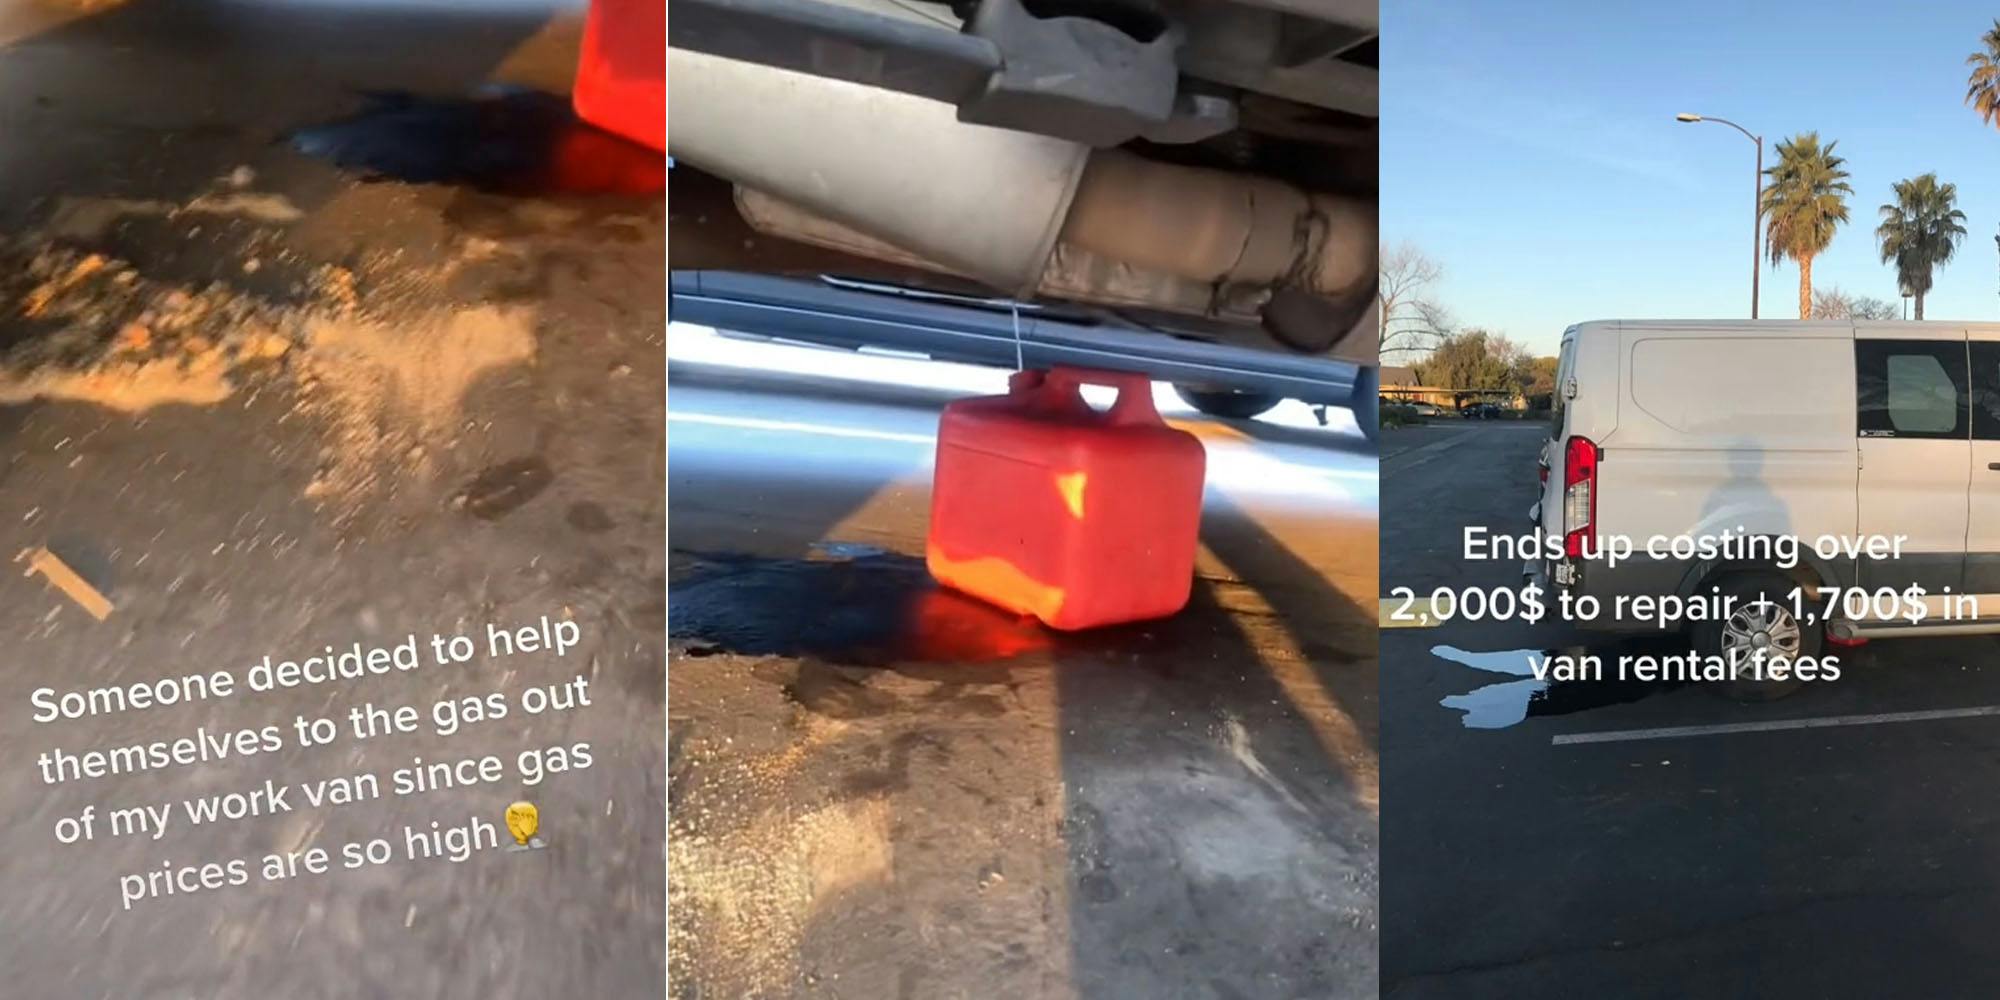 parking lot underneath van caption " Someone decided to help themselves to the gas out of my work van since gas prices are so high" (l) Gas can being filled by hole drilled in fuel tank (c) Van in parking lot caption " End up costing 2,000$ to repair + 1,700$ in van rental fees" (r)